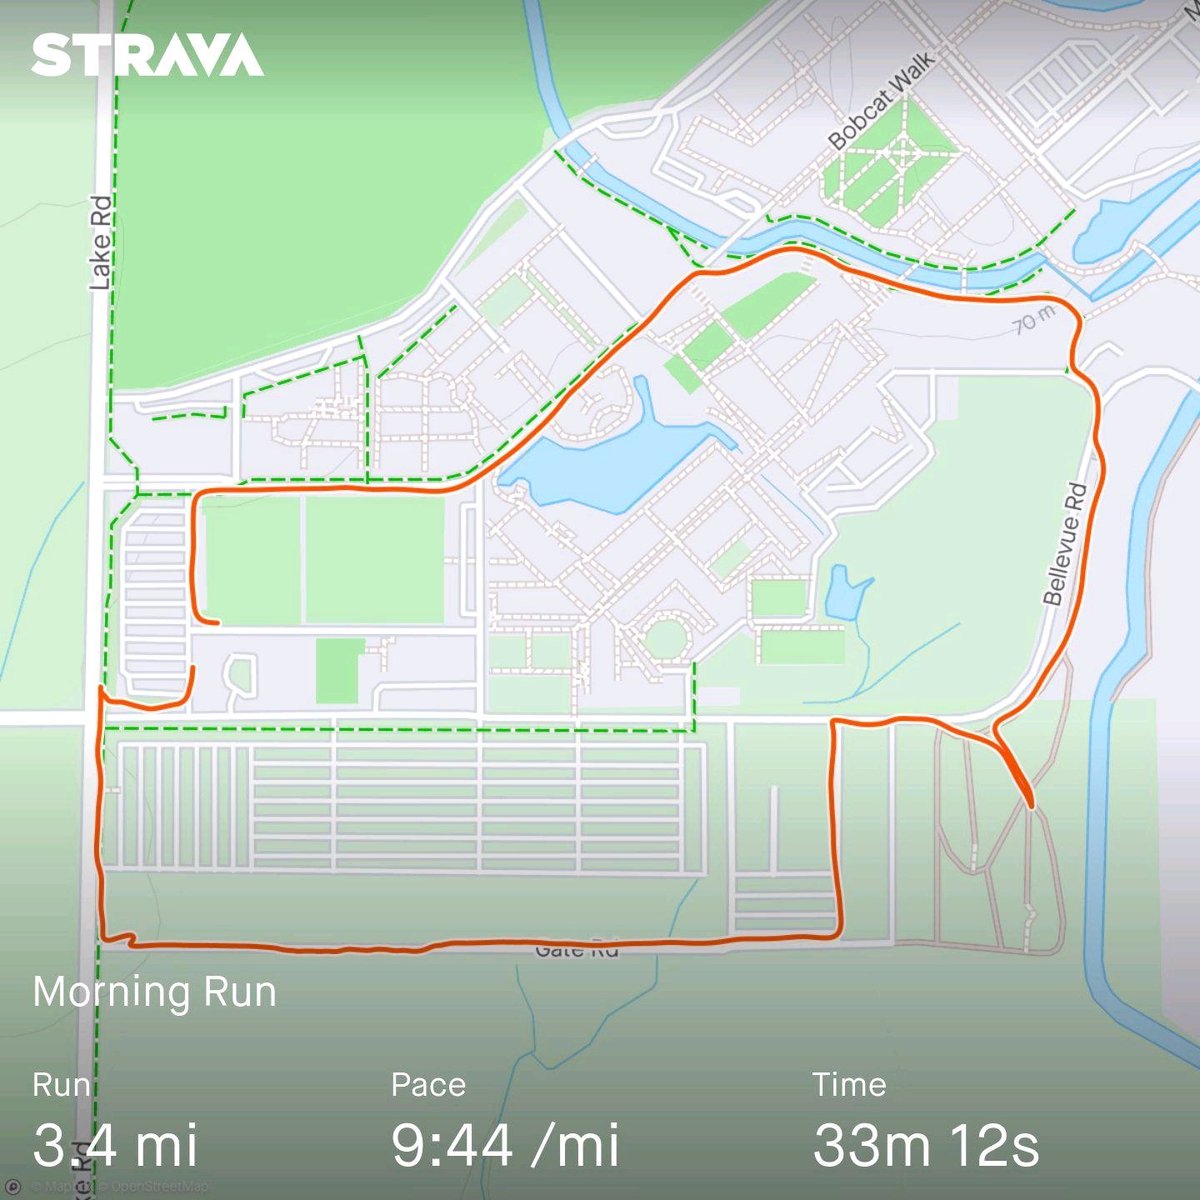 5k for our @UCMercedXCTrack alumni challenge. Chill 7:50 pace, but left shin was not happy.  So I had to slow down. strava.app.link/WIys3P04gJb